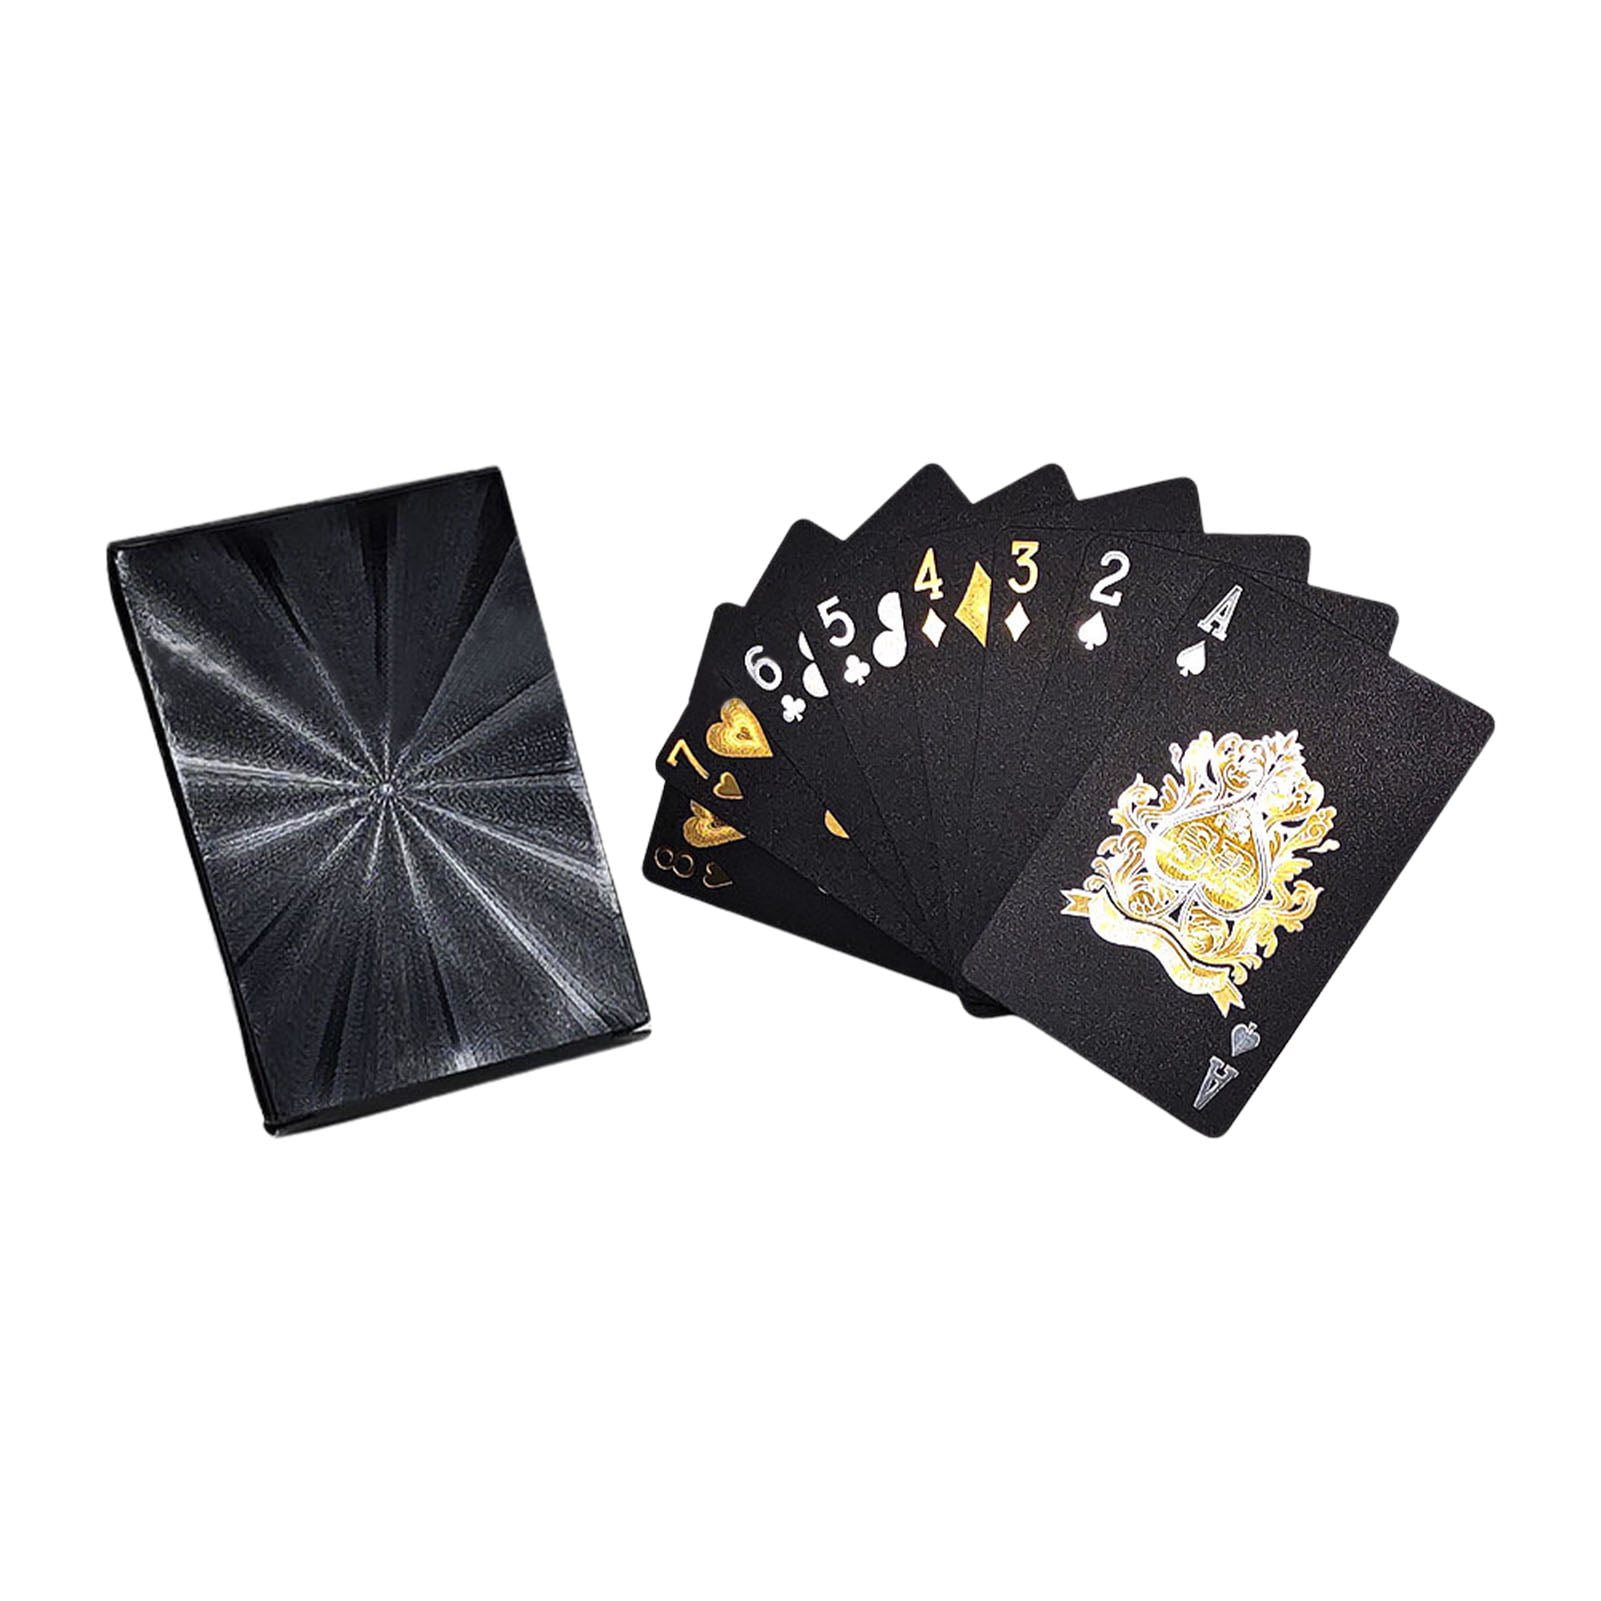 Details about   Poker Benjamin Design Playing Cards Plastic Waterproof poker Adult & Child Game 